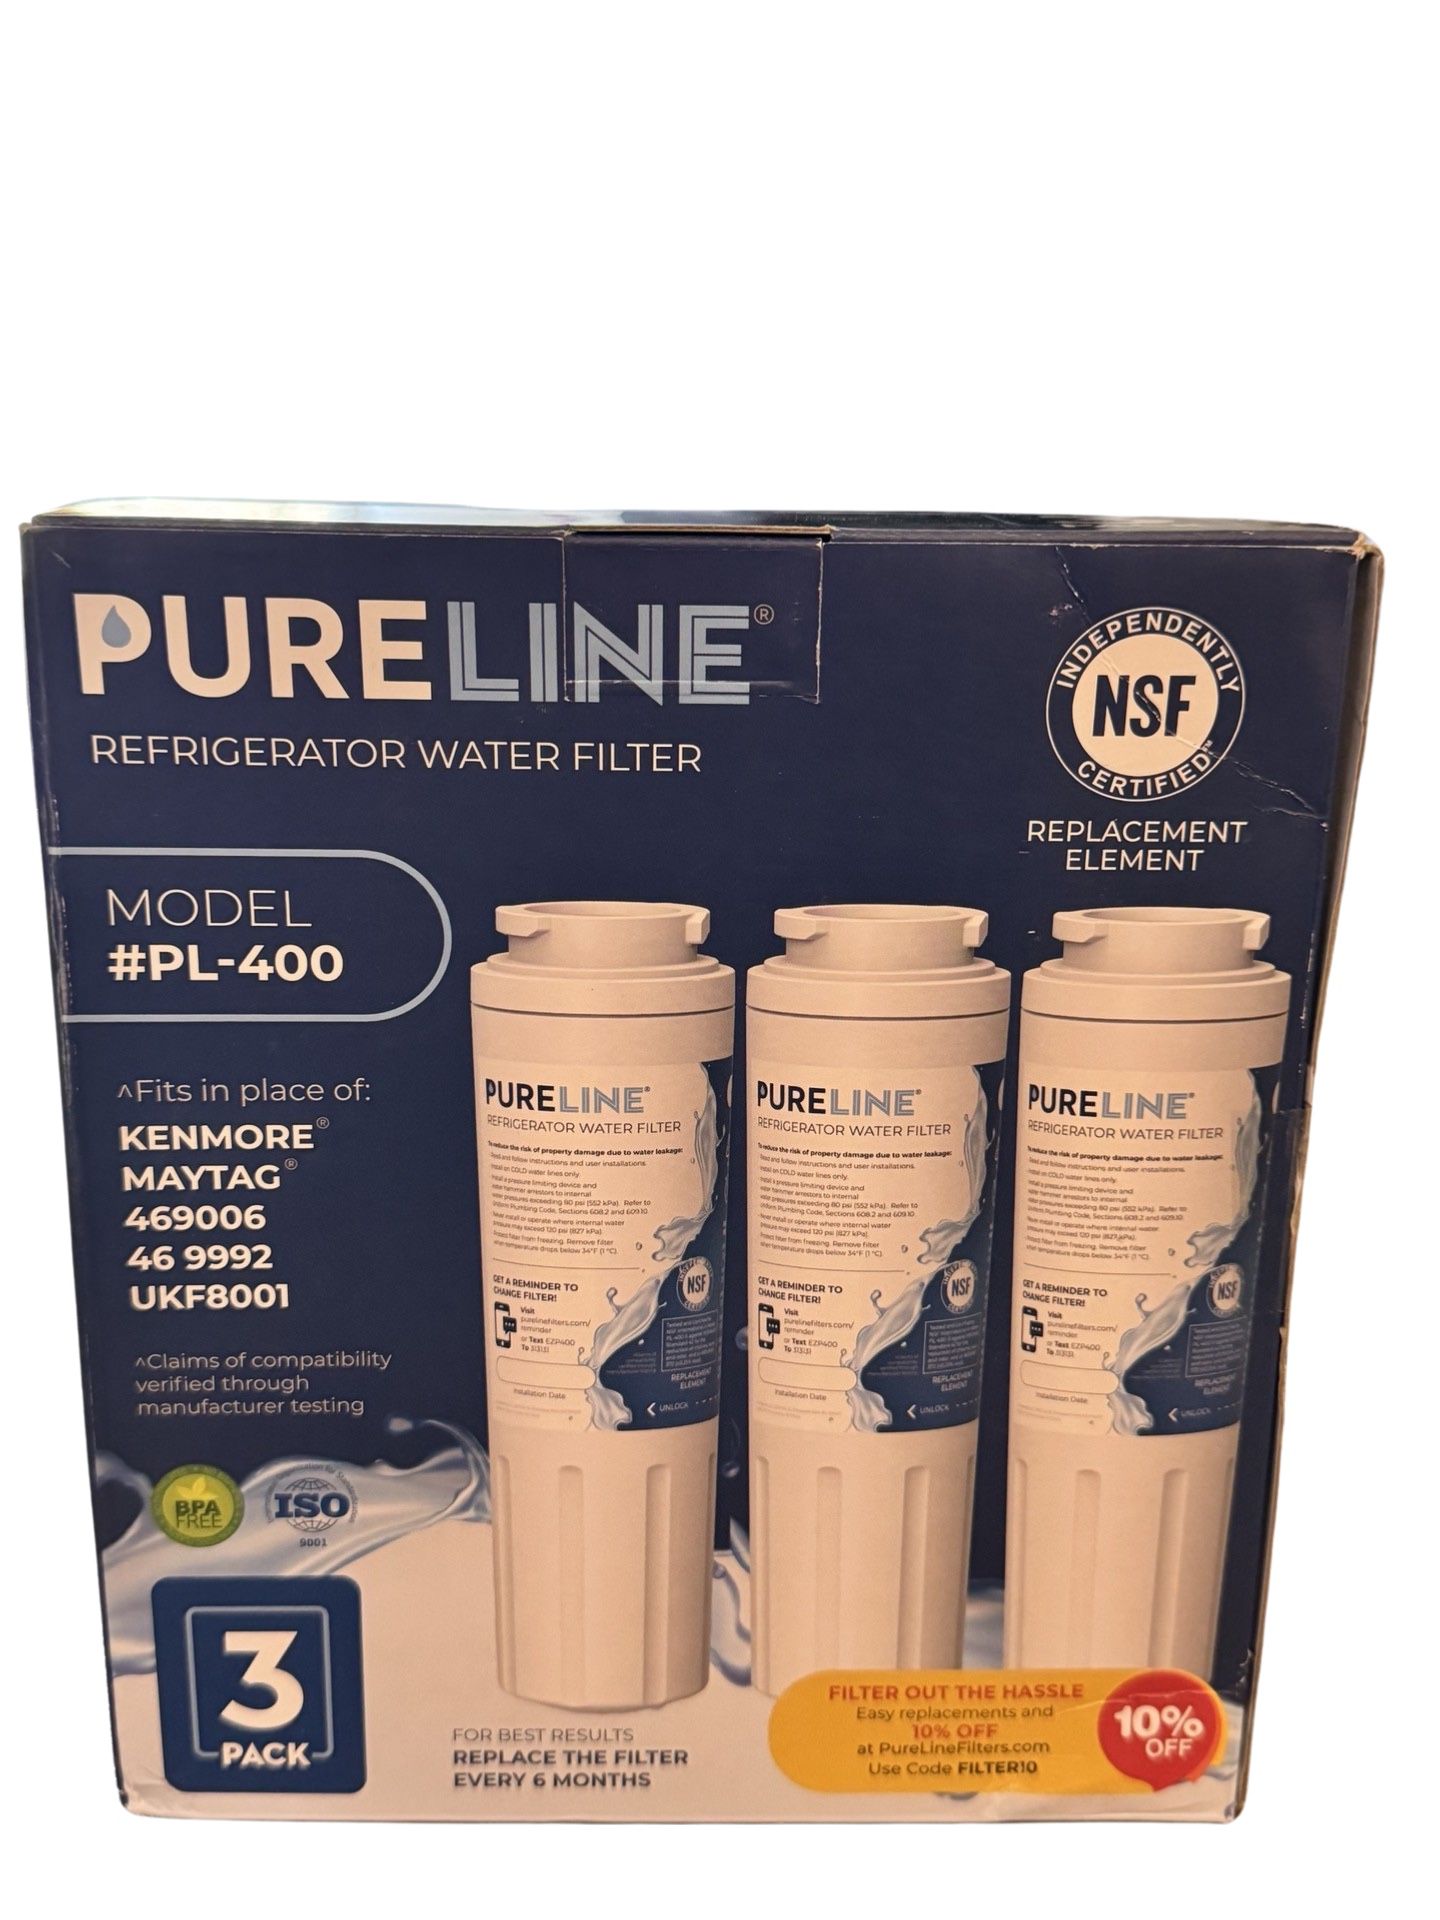 PURELINE Refrigerator Water Filter Model PL-400 / 3 Pack Kenmore Maytag New Shipping Available 